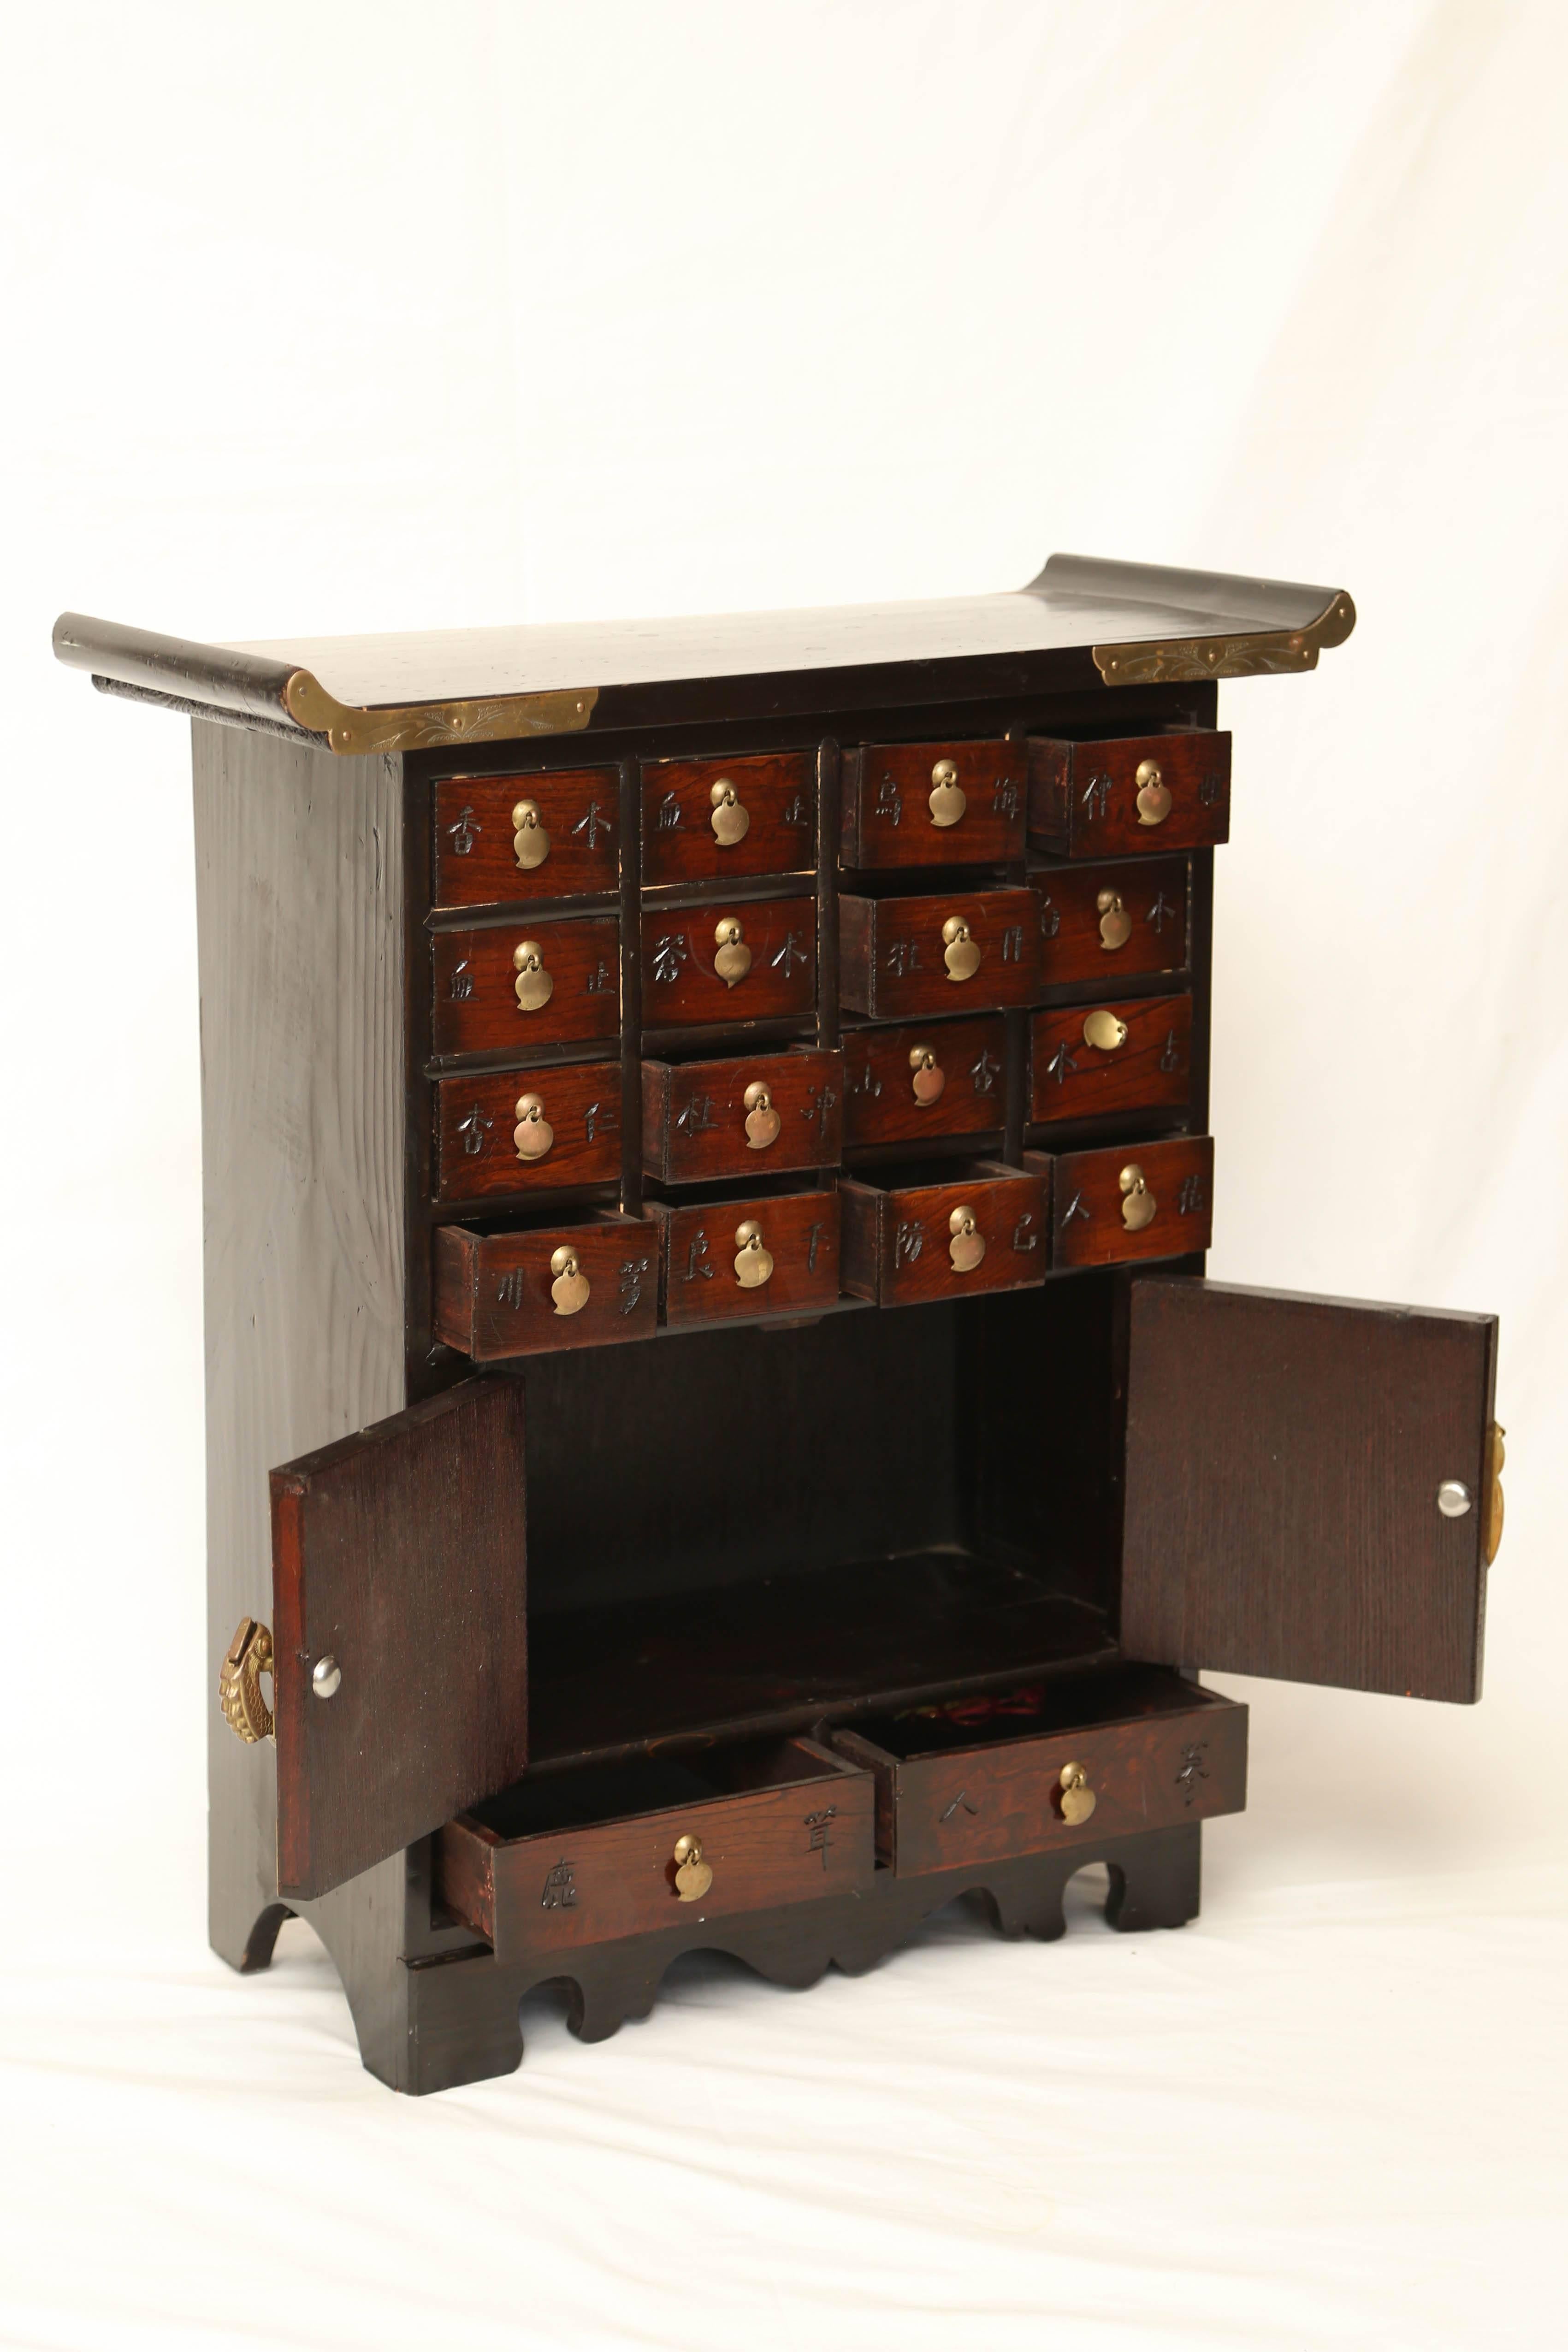 Small Asian multi drawer apoticary cabinet also perfect for jelewy too. Decorated with Asian characters, brass butterfly hinges, figural fish lock. Dimensions: H: 24.5 inches: W 21.25 inches, D 9 inches.